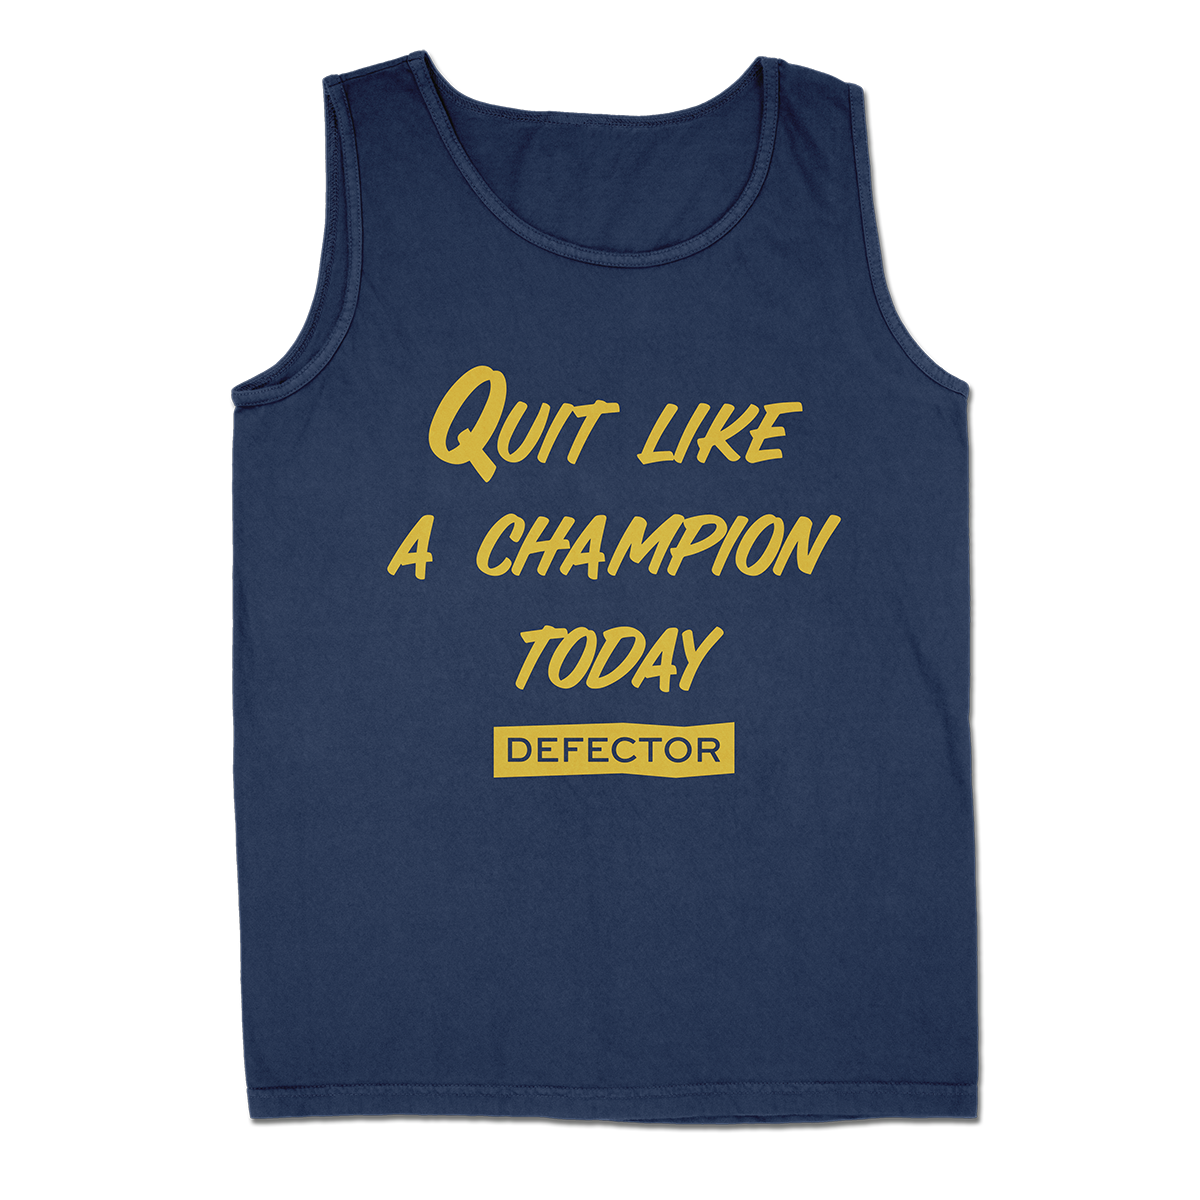 Quit Like A Champion Today blue tank top with yellow font and Defector logo